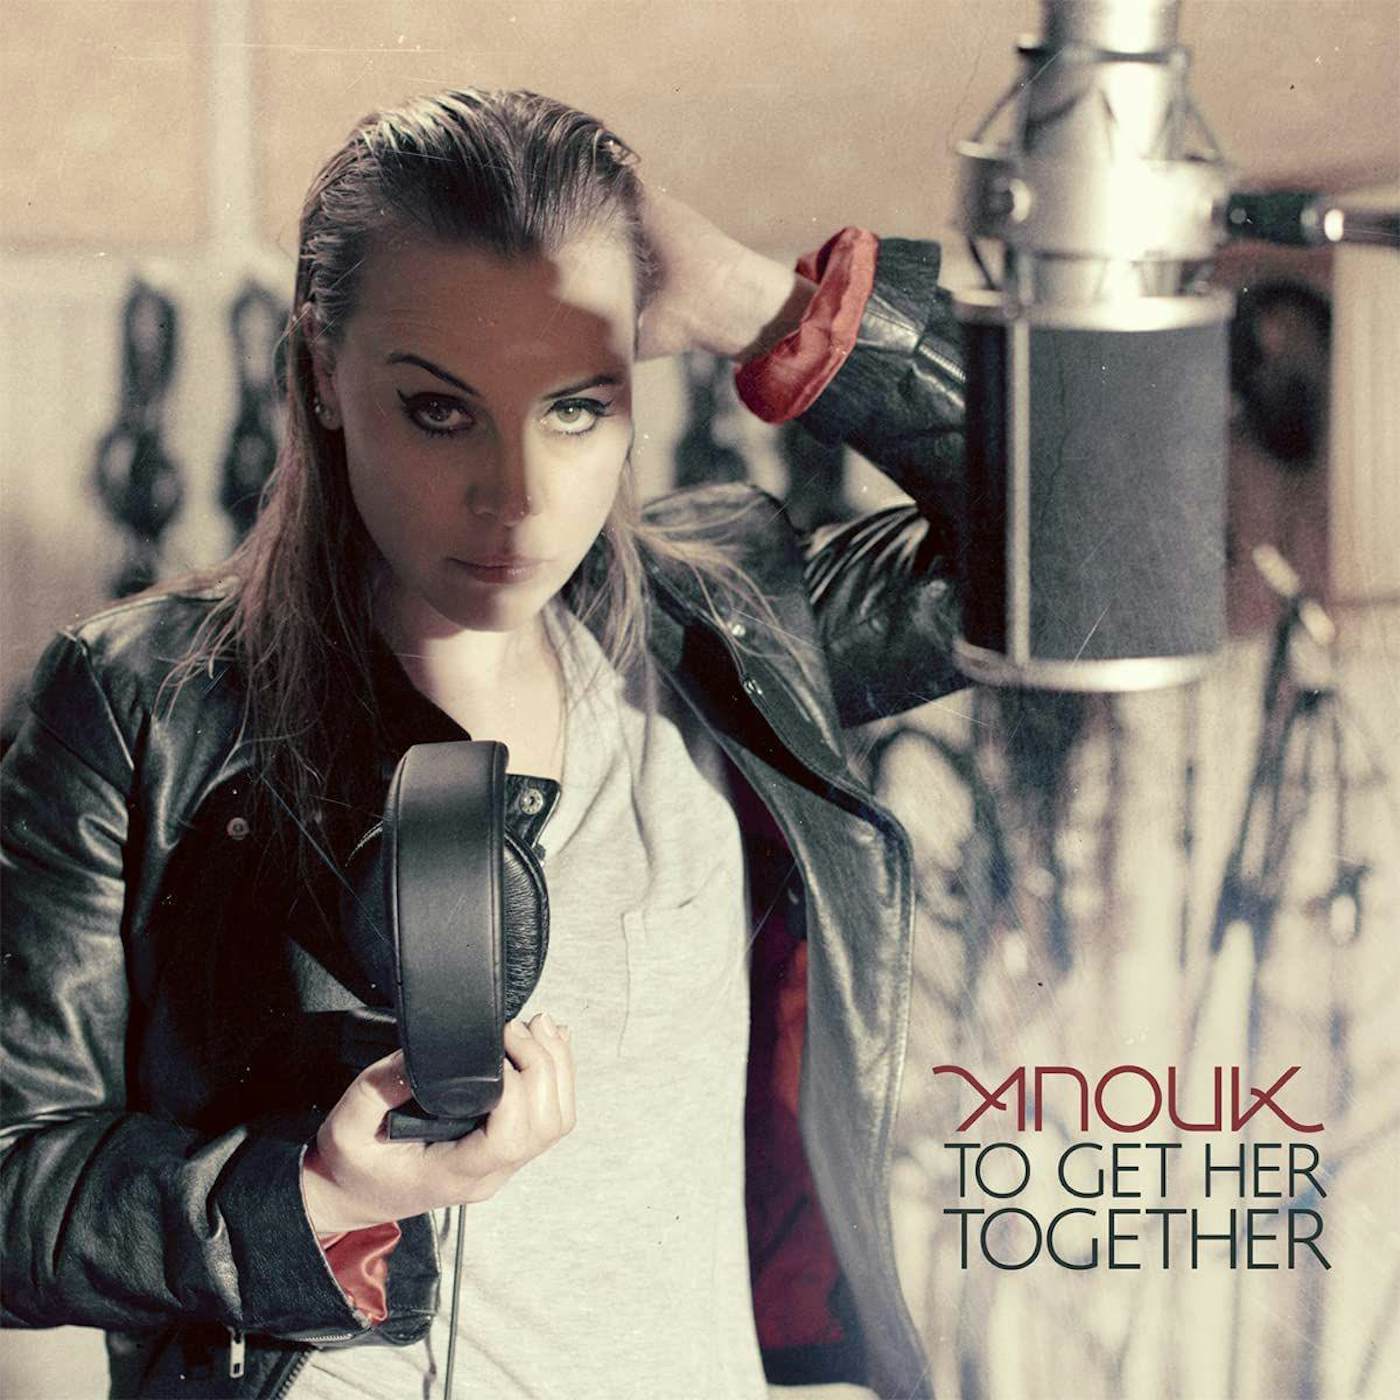 Anouk To Get Her Together (Limited/Crystal Clear/180g) Vinyl Record